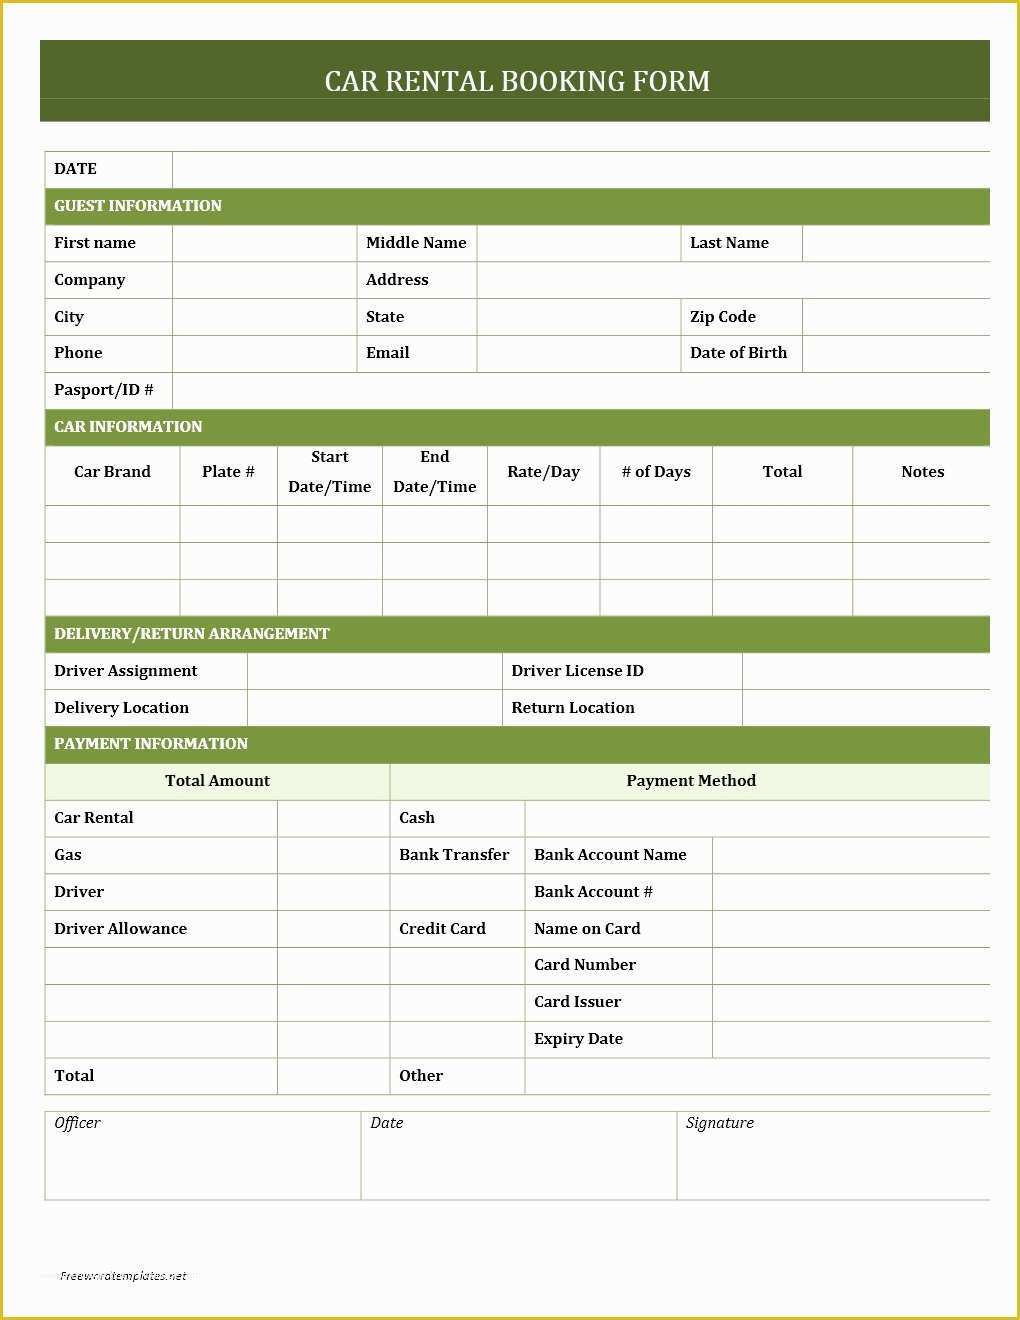 Free Car Rental Invoice Template Excel Of Car Rental Booking form